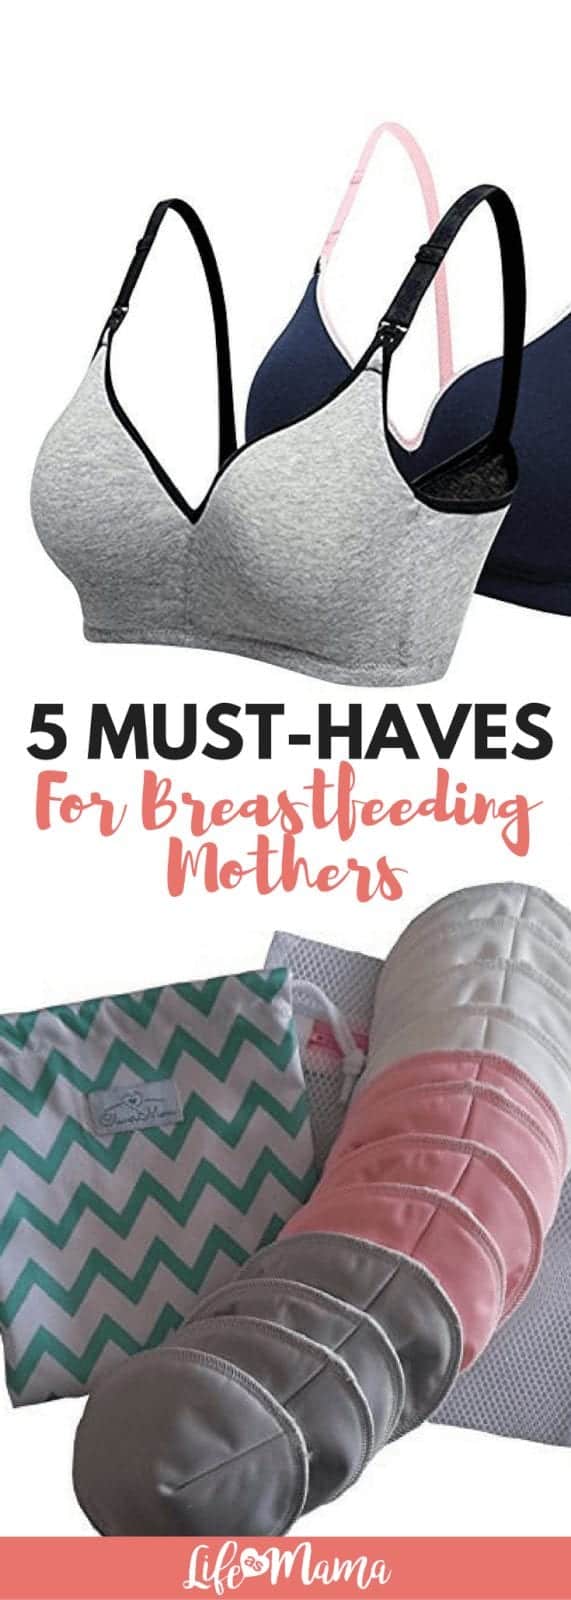 must-haves for breastfeeding